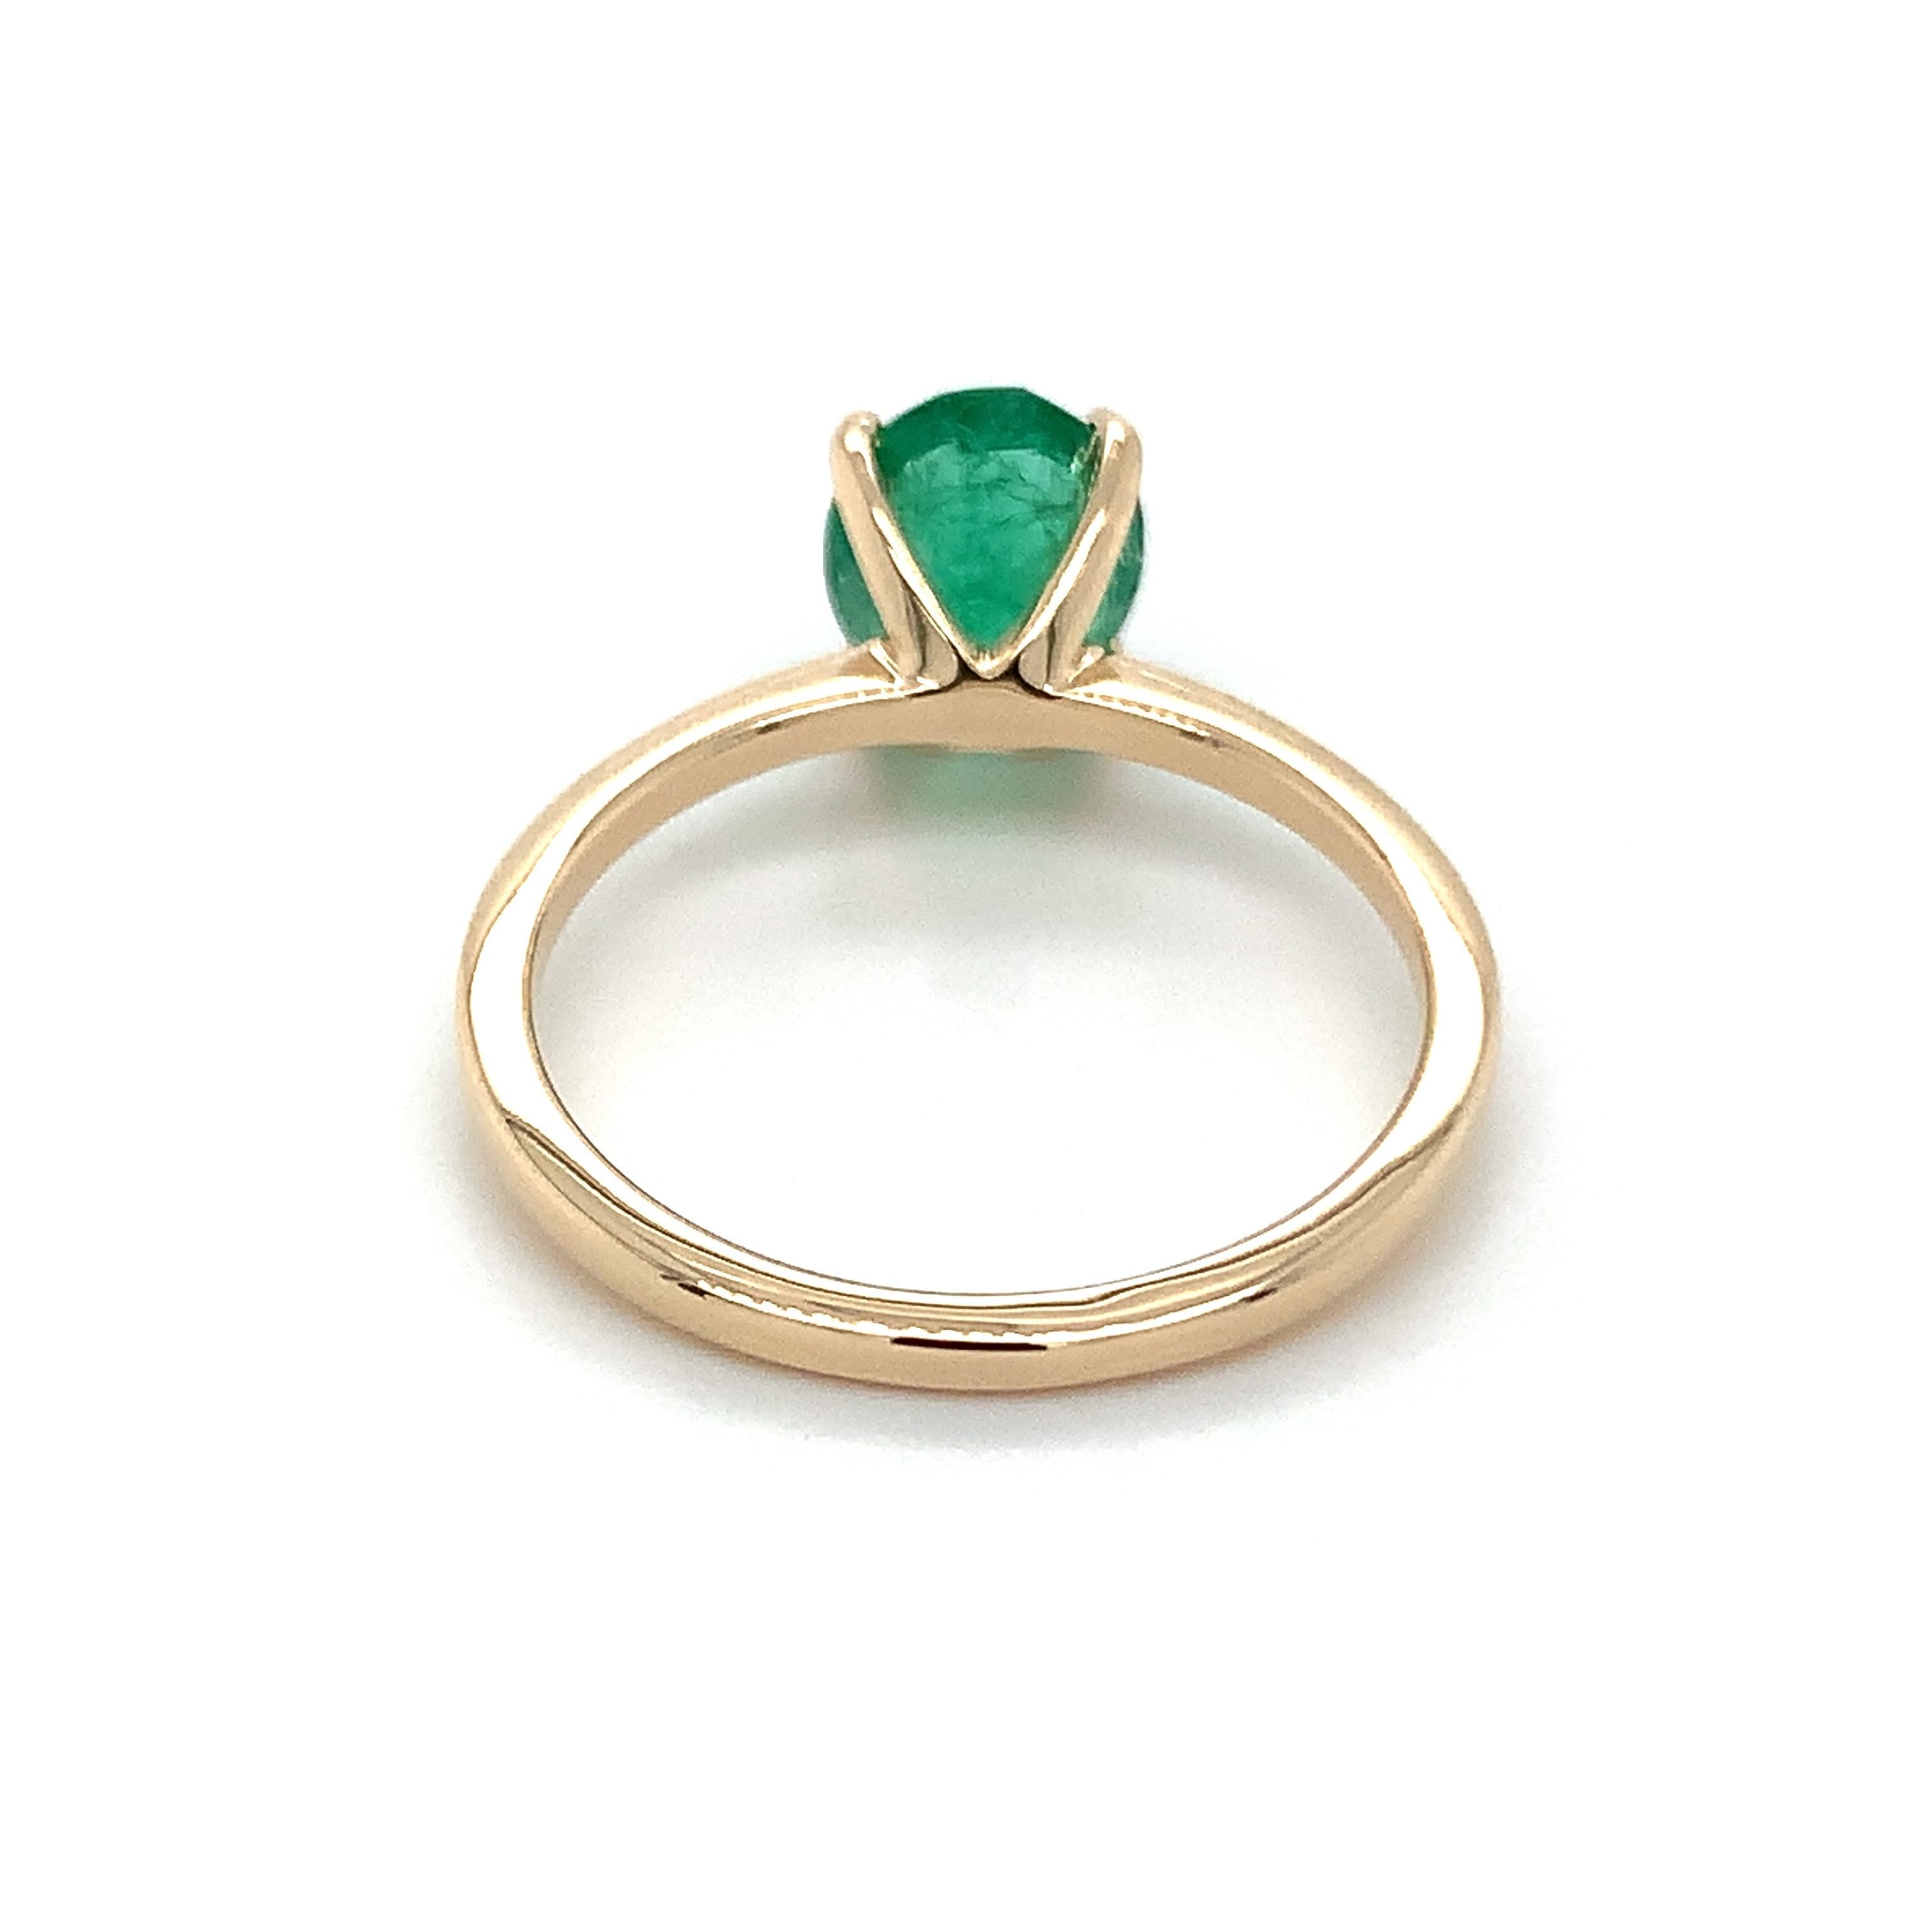 1.35 Carat Oval Cut Emerald Ring in 10k Yellow Gold In New Condition For Sale In Fort Lee, NJ